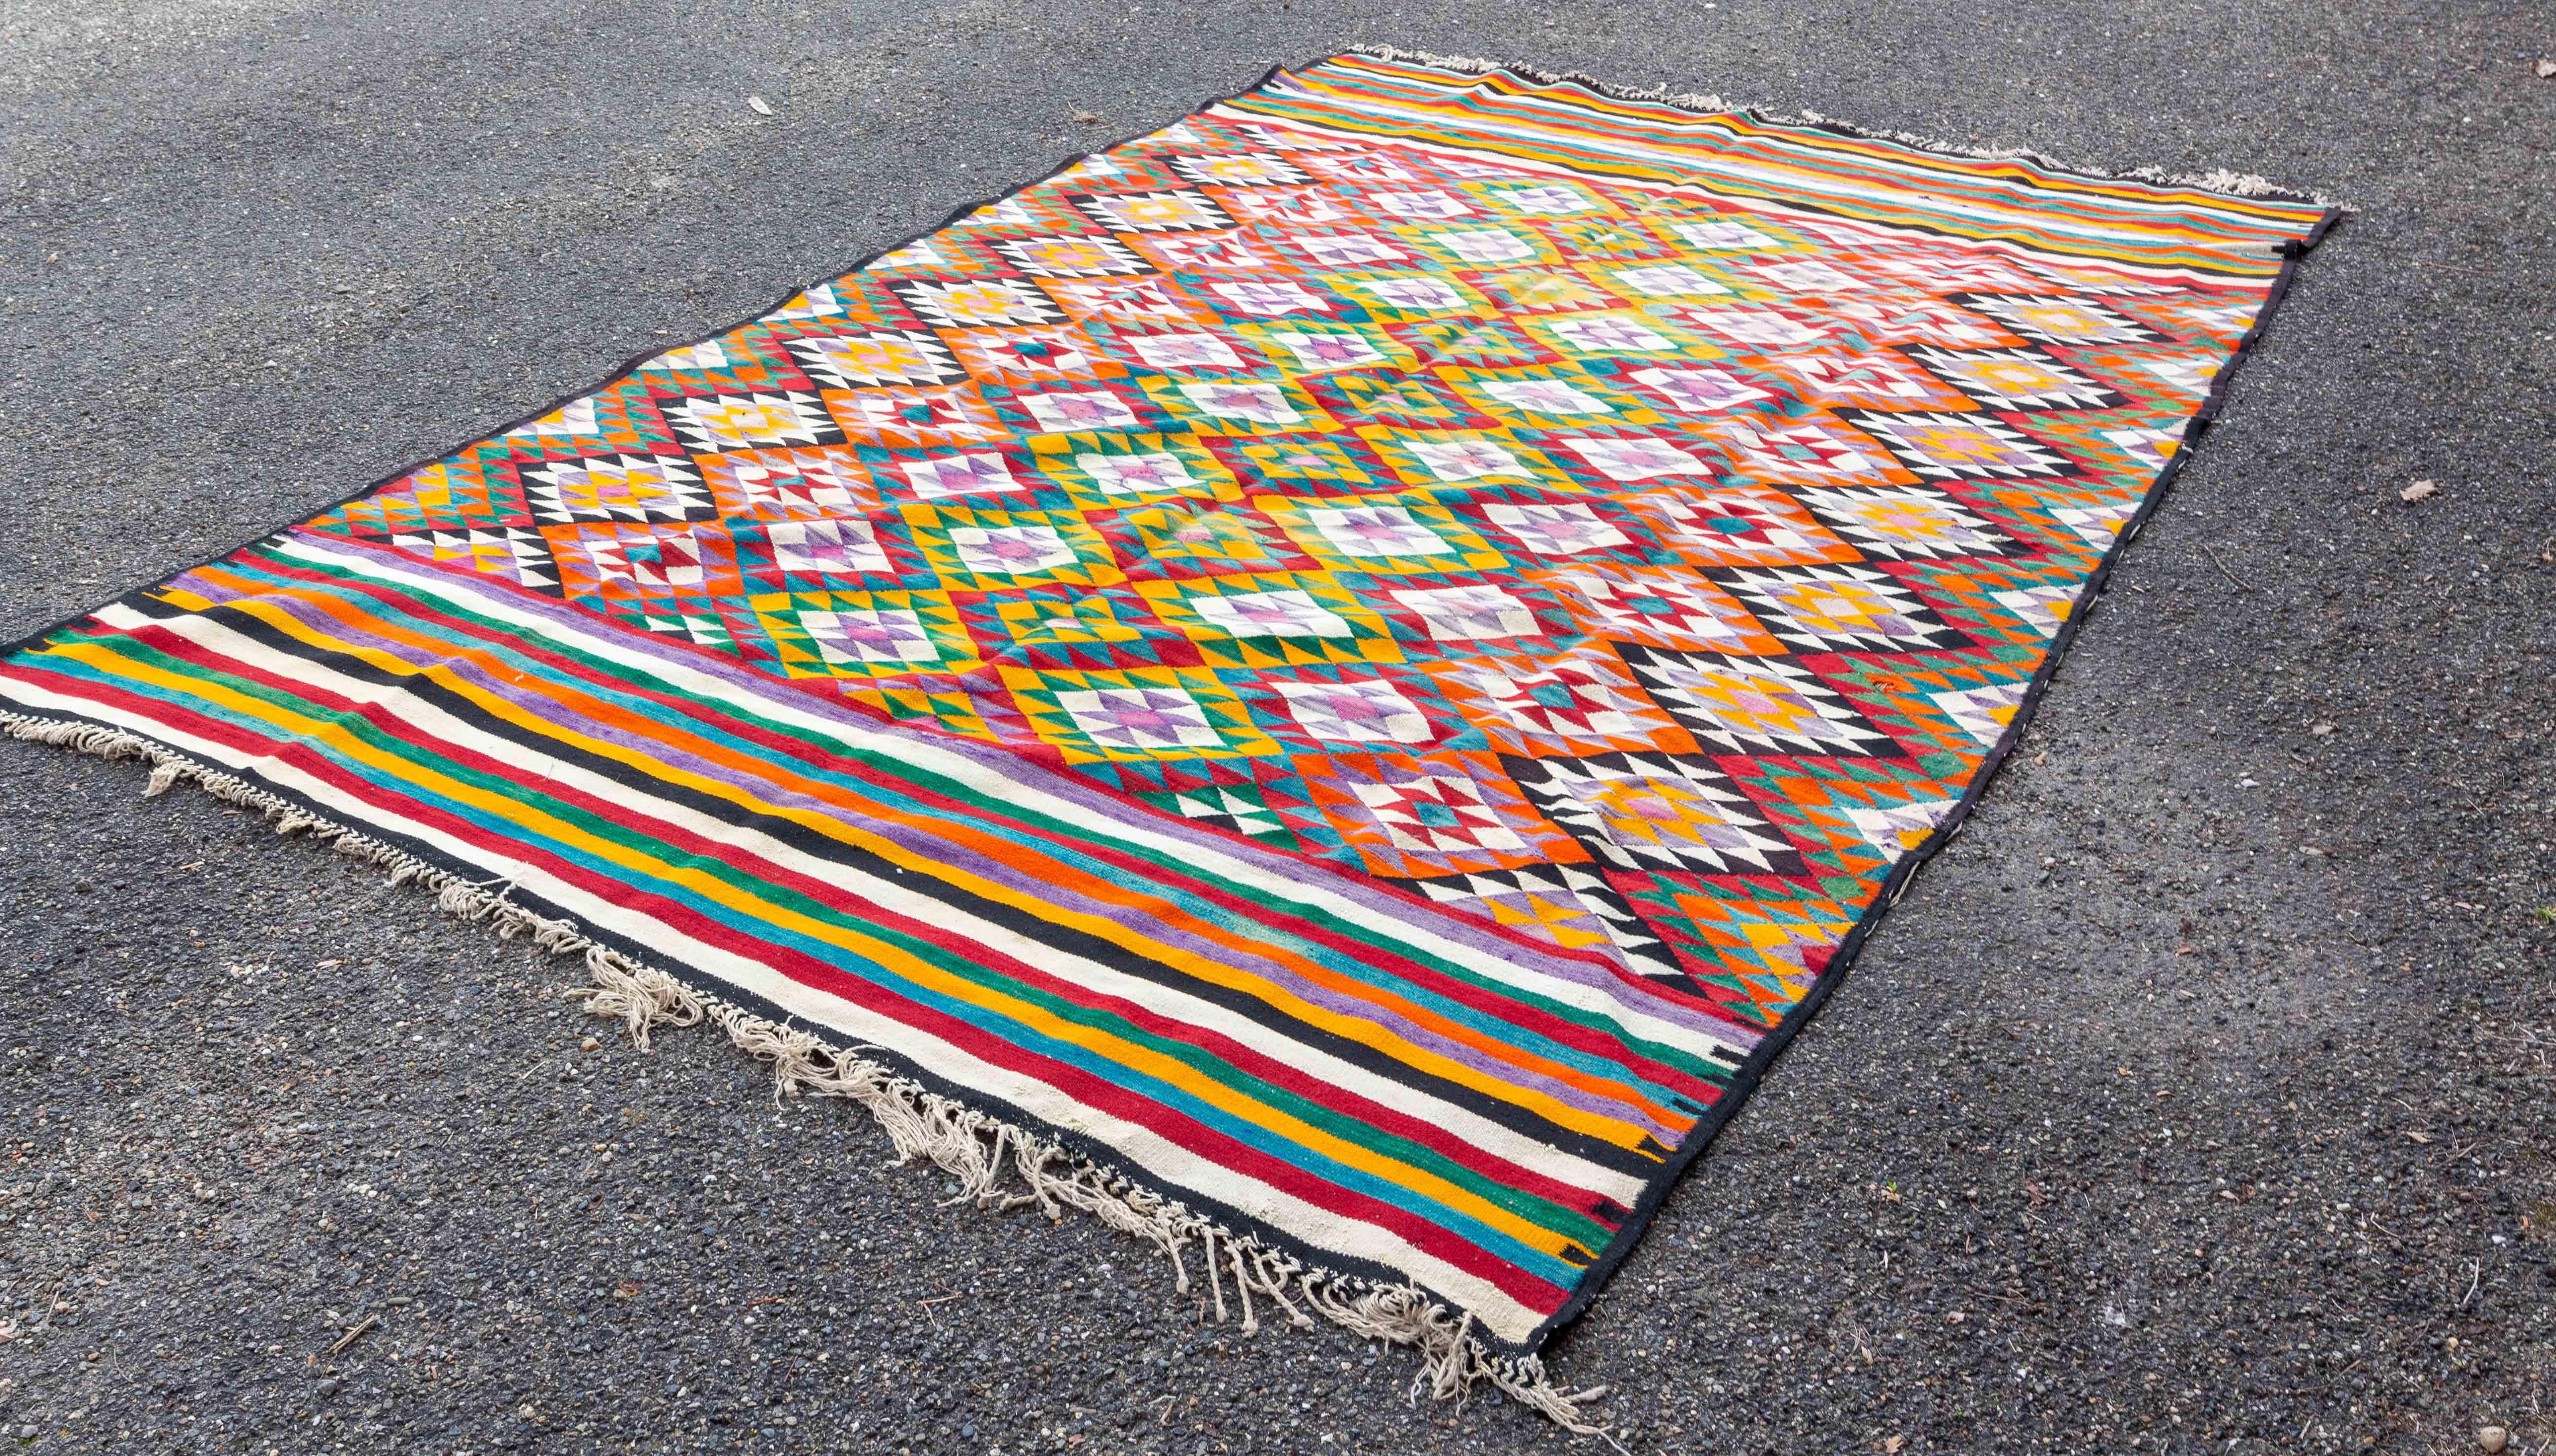 Hand woven in wool and native to Turkey around 1950-1960, this article is a vintage Kilim rug that evokes a Turkish diamond motif from the middle of the last century, appeared at that time, known for producing Kilim rugs with modern and maximalist